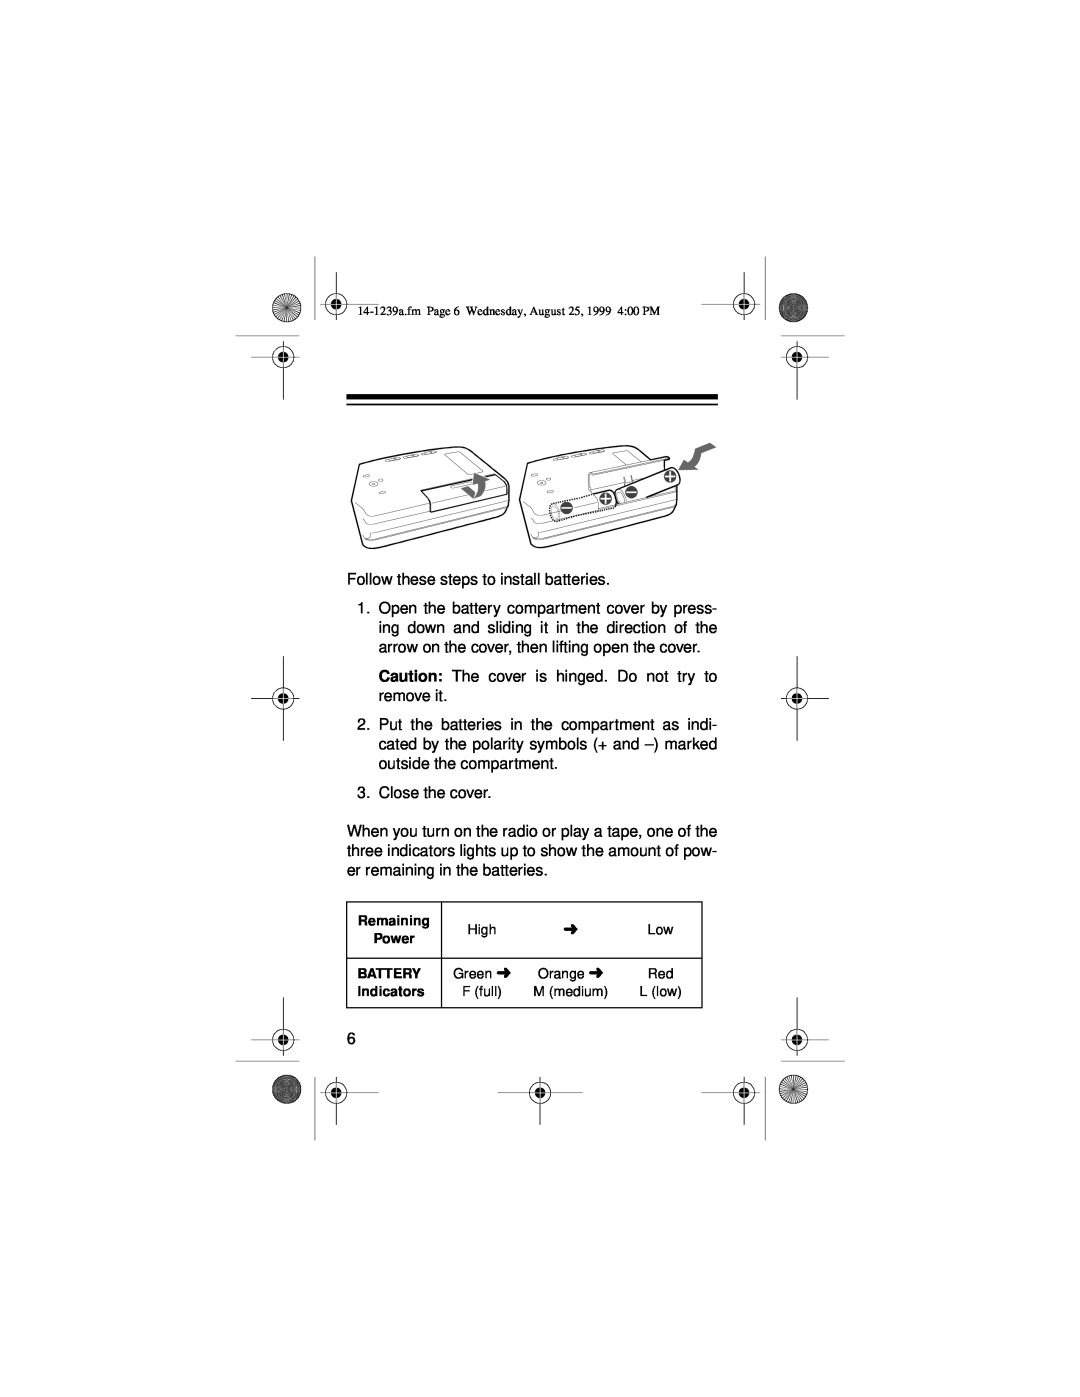 Optimus SCR-96 owner manual Follow these steps to install batteries 